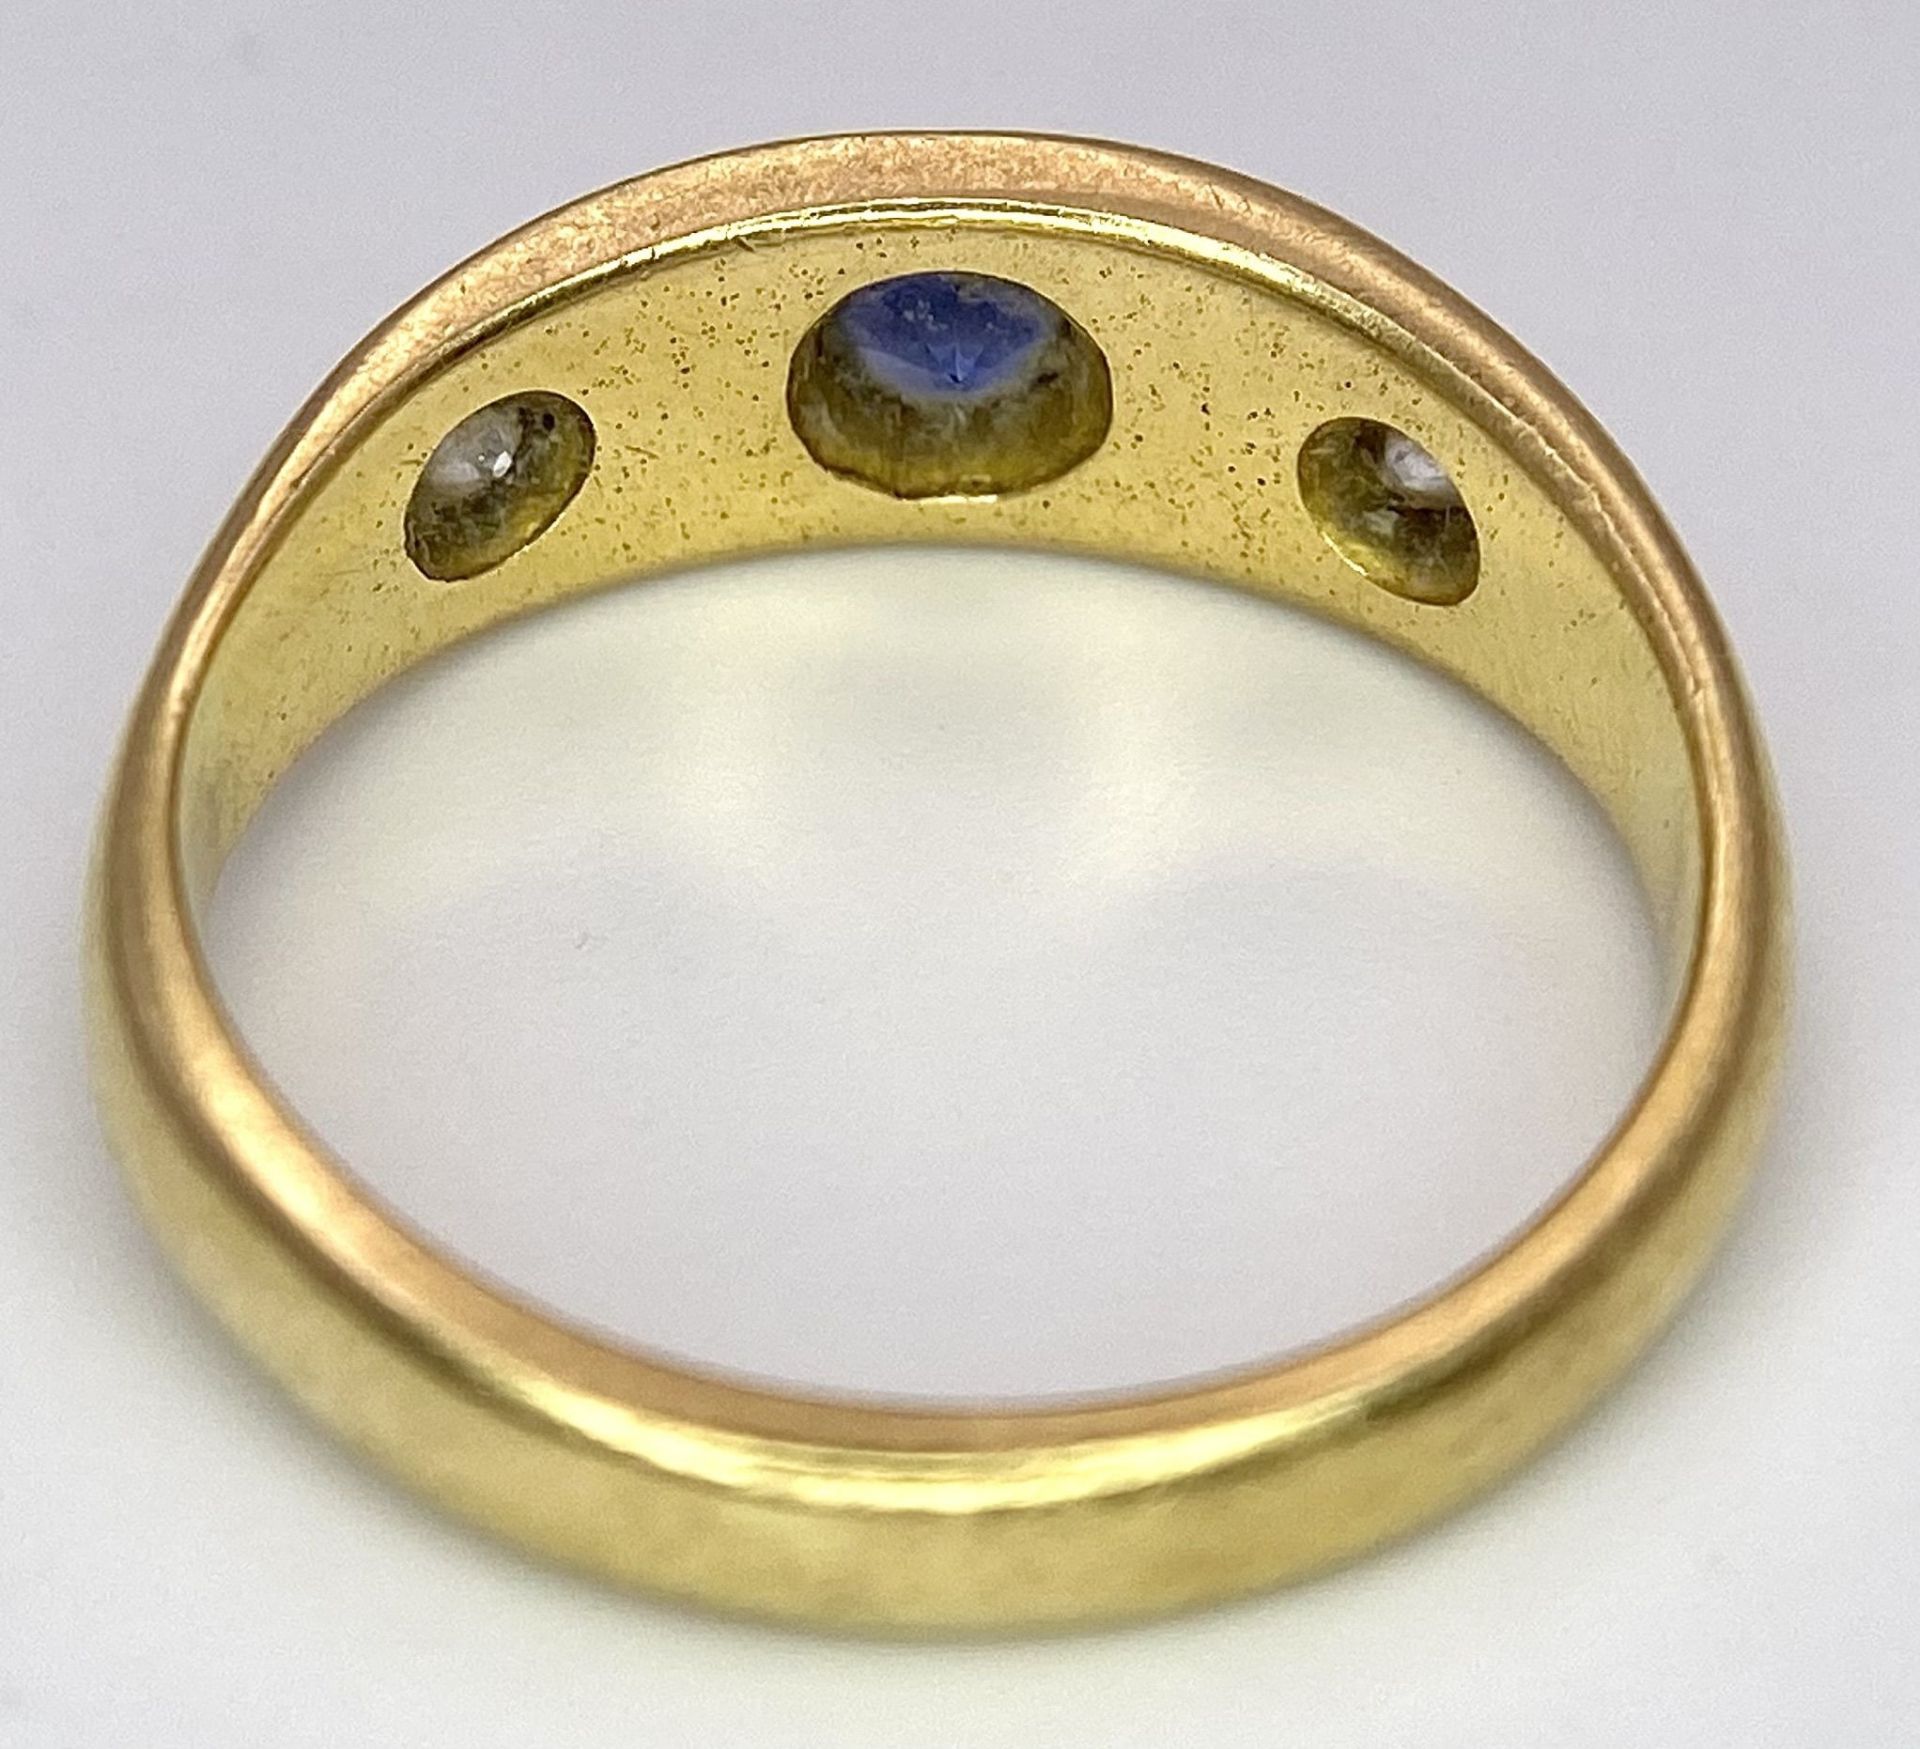 A Vintage 18K Yellow Gold Diamond and Sapphire Gypsy Ring. Size L. 4.6g total weight. - Image 5 of 6